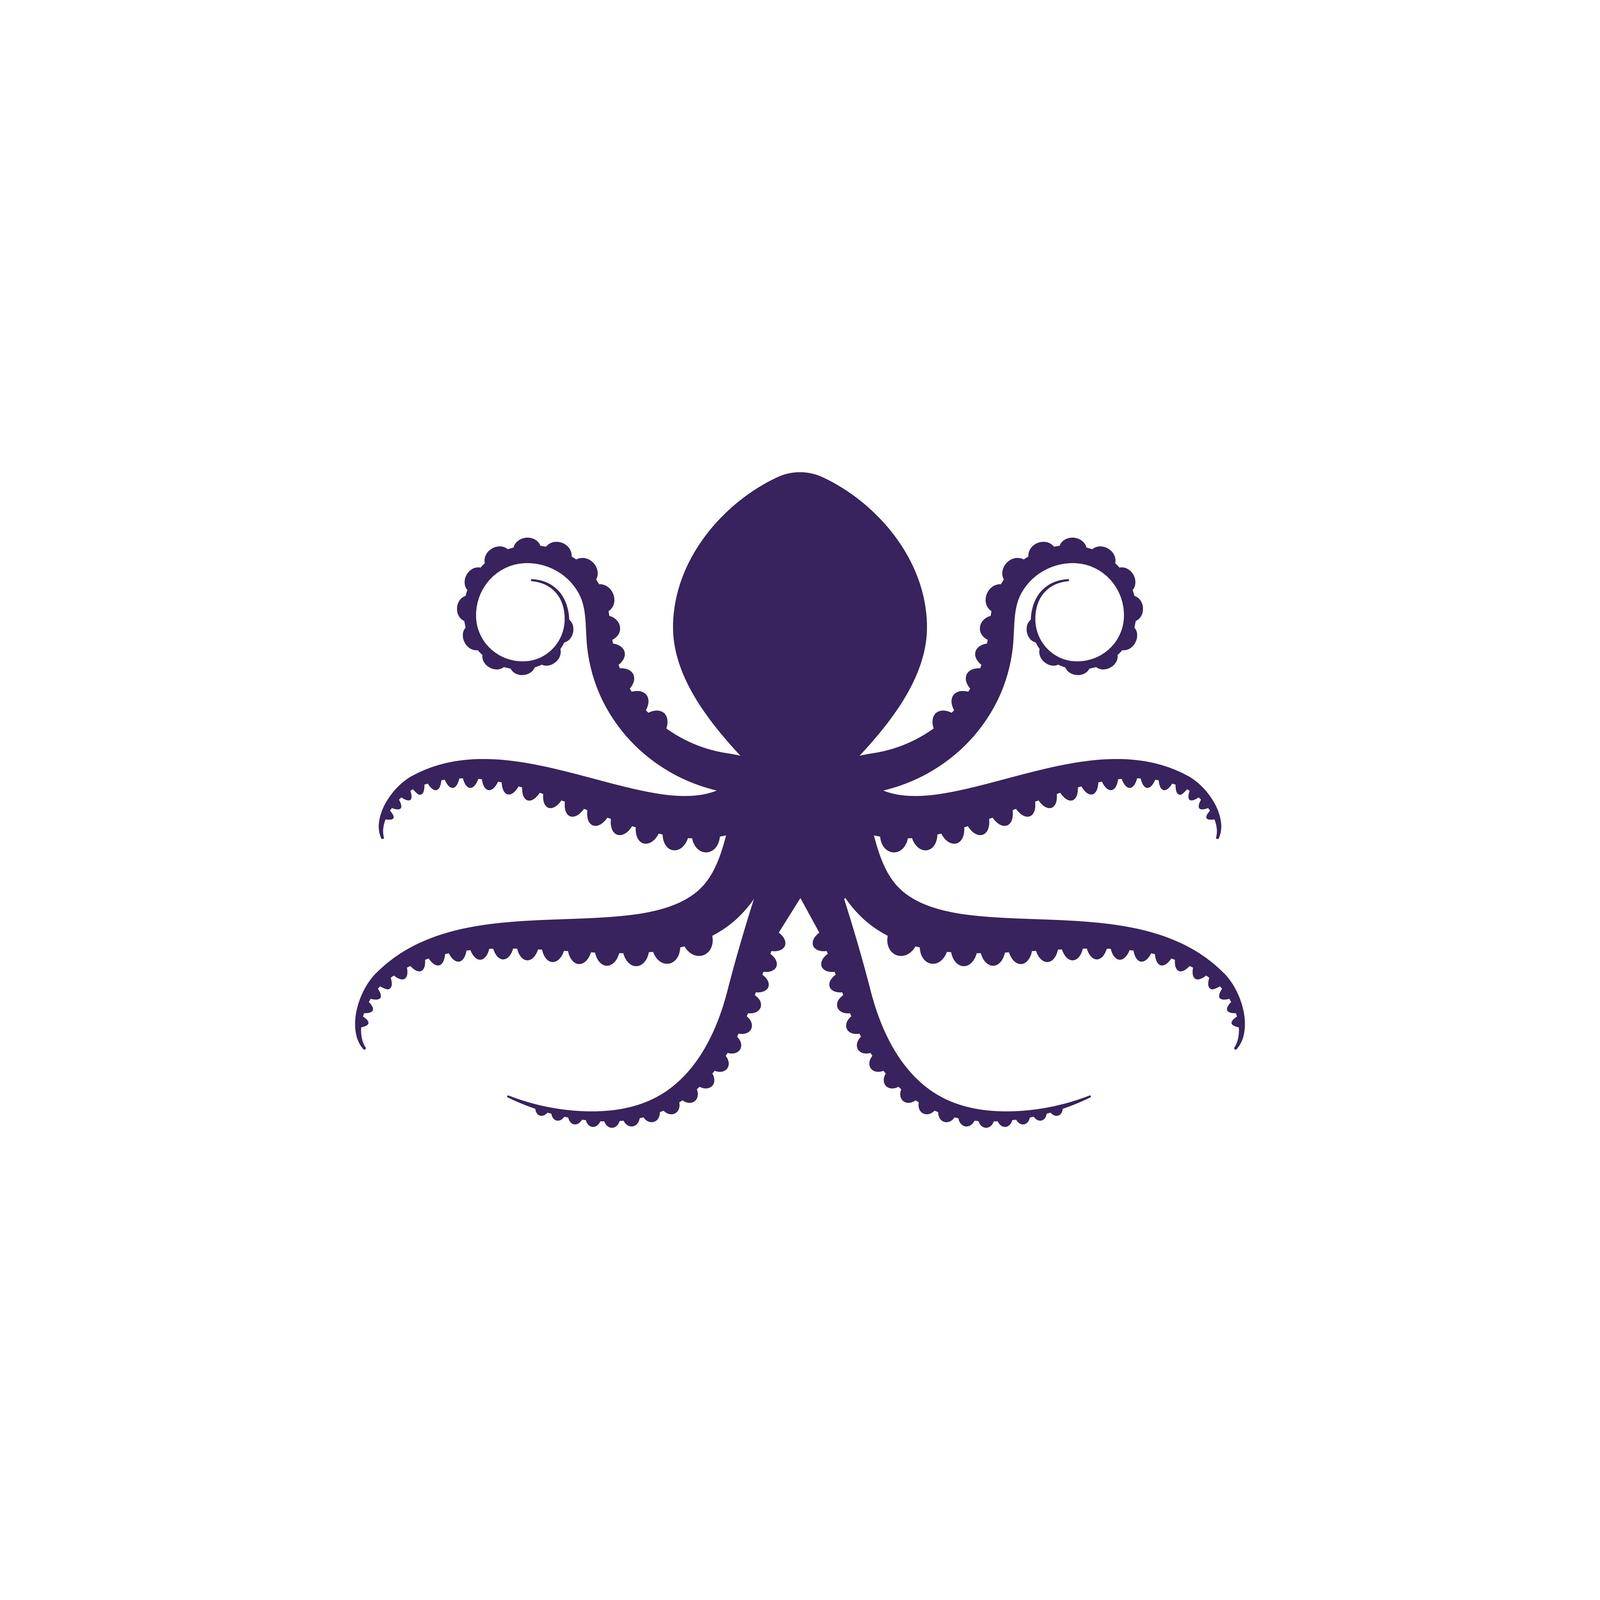 Silhouette Octopus vector template. Octopus vector by ichadsgn